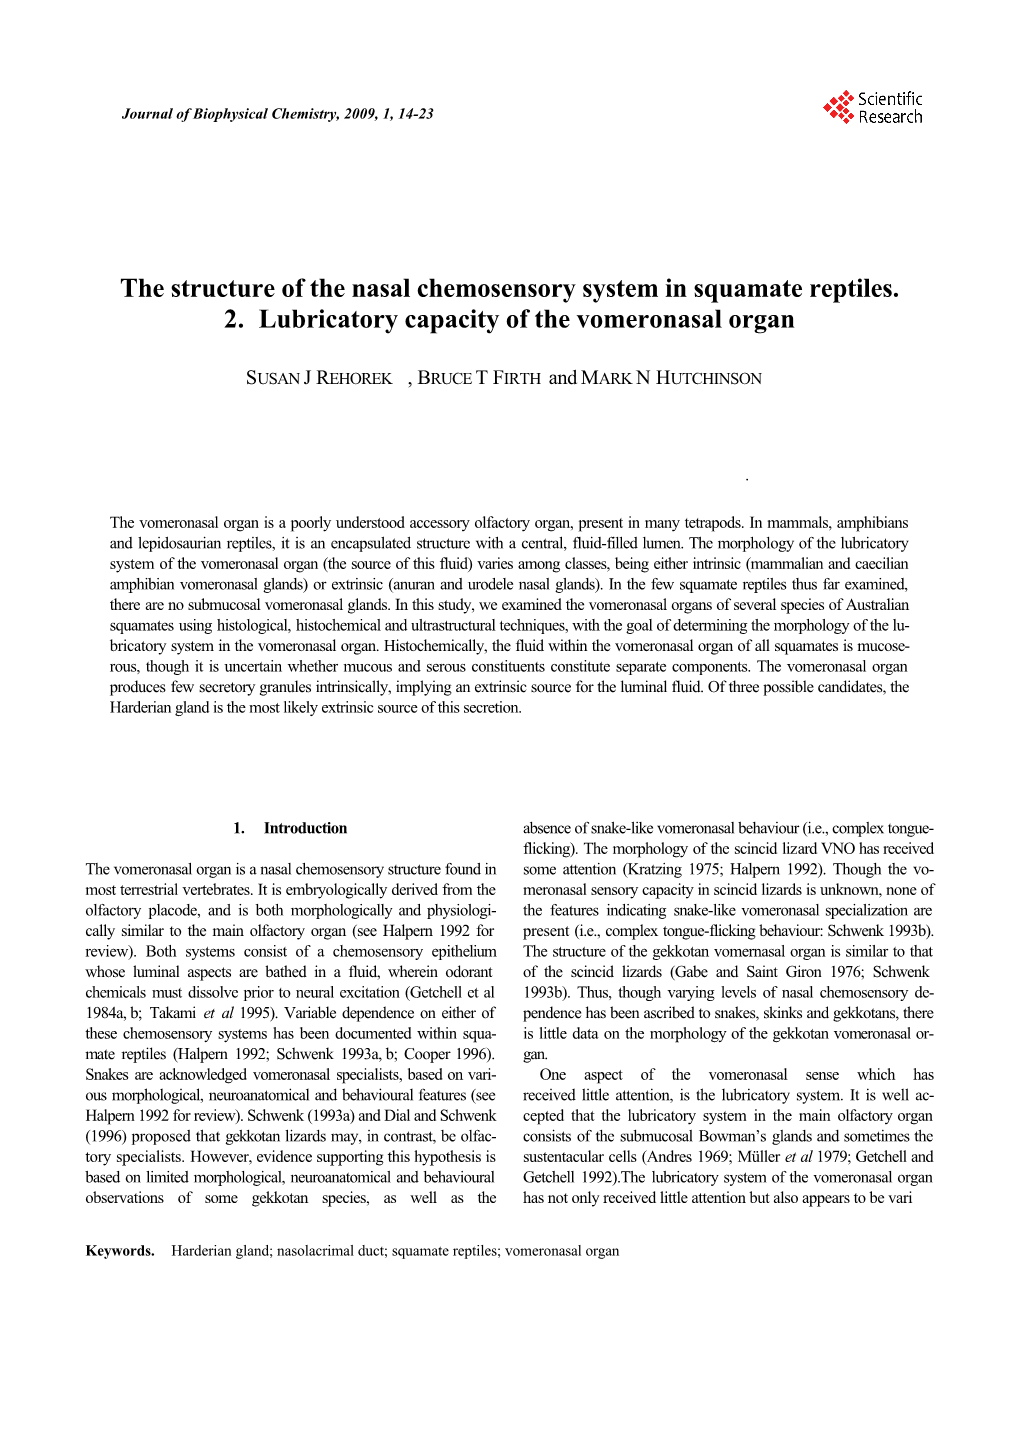 The Structure of the Nasal Chemosensory System in Squamate Reptiles